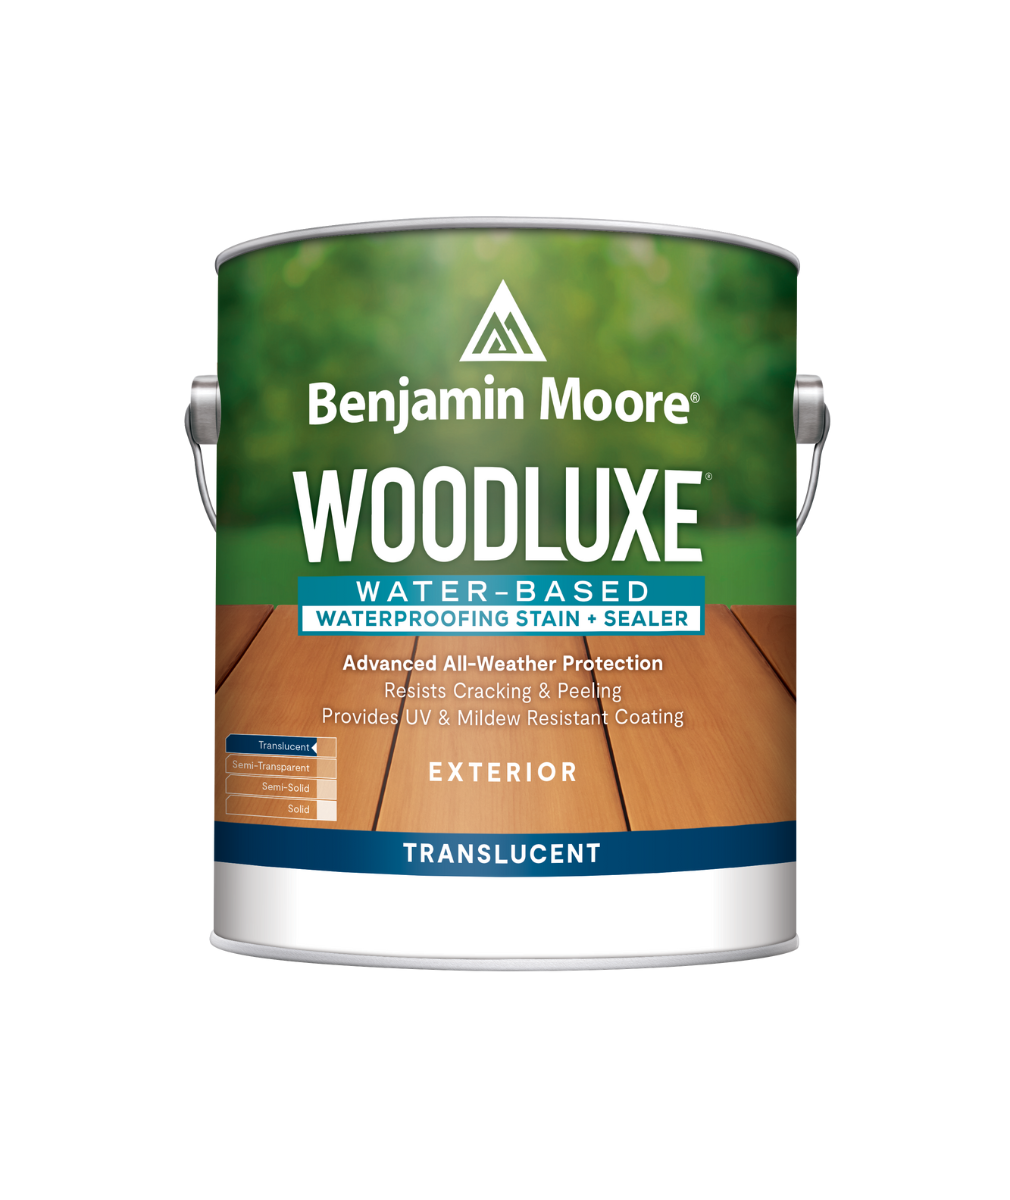 Benjamin Moore Woodluxe® Water-Based Translucent Exterior Stain available at Southwestern Paint.